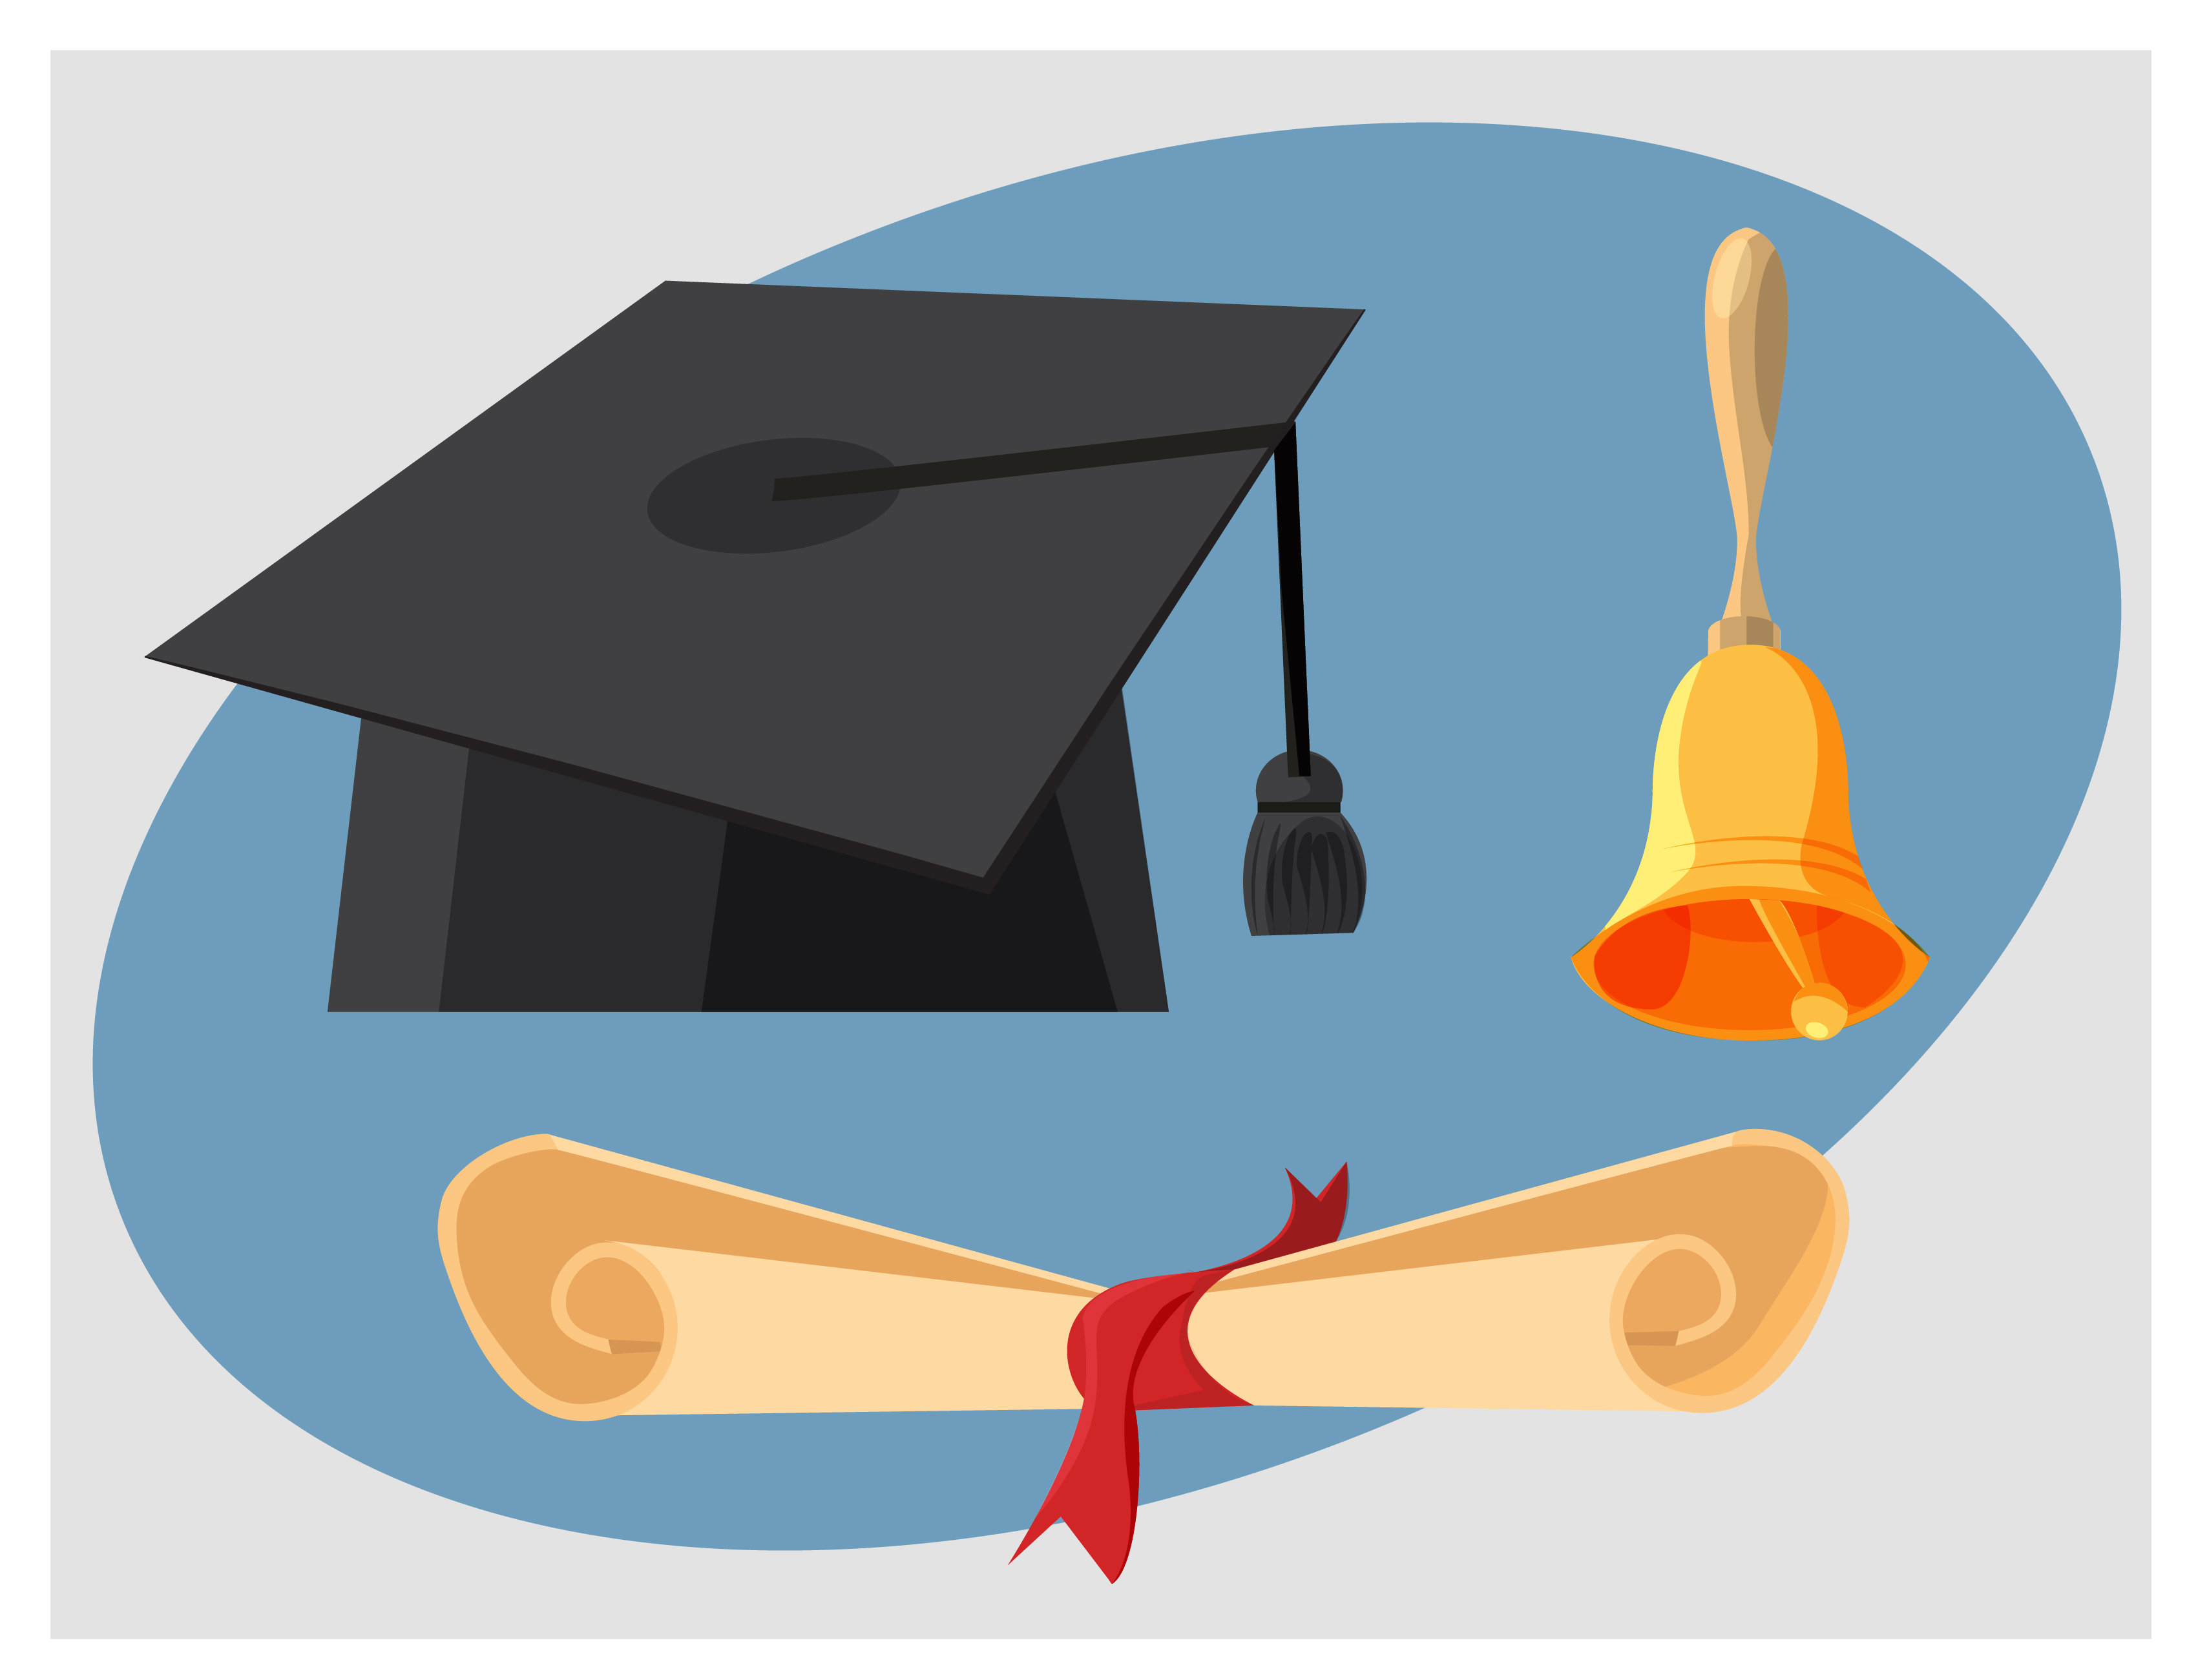 Education objects vector illustration for design Photoshop brush